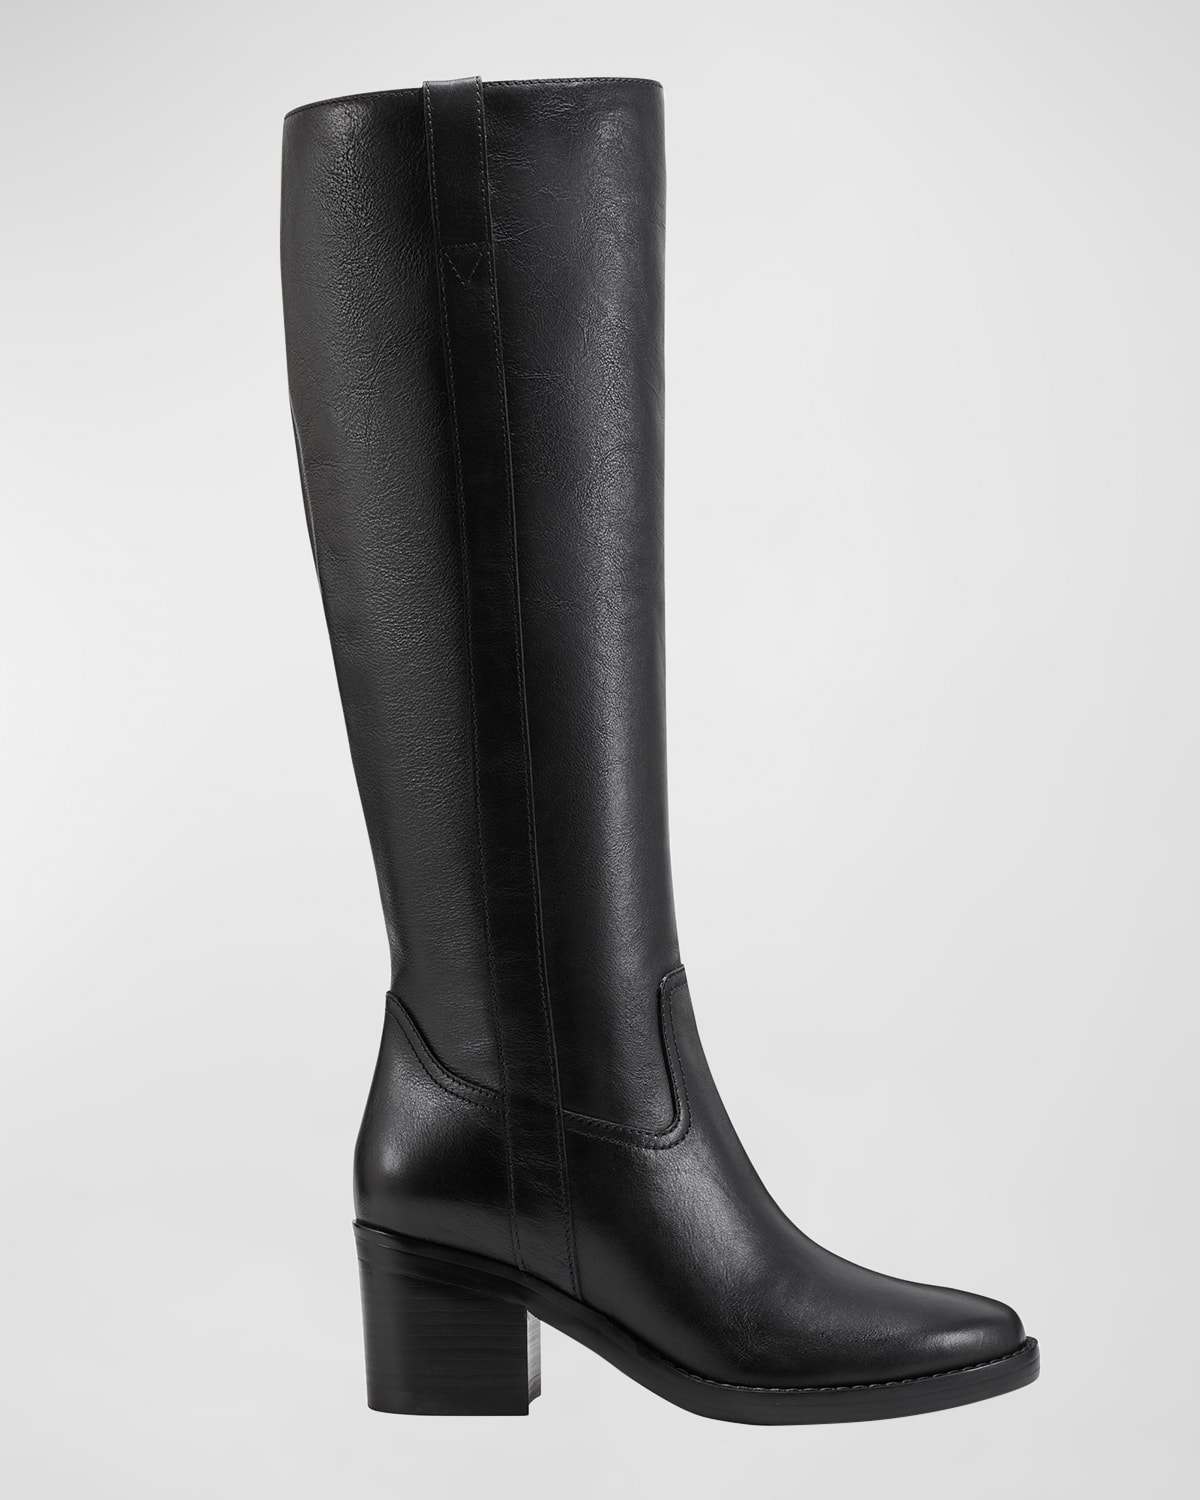 Hydria Leather Riding Boots